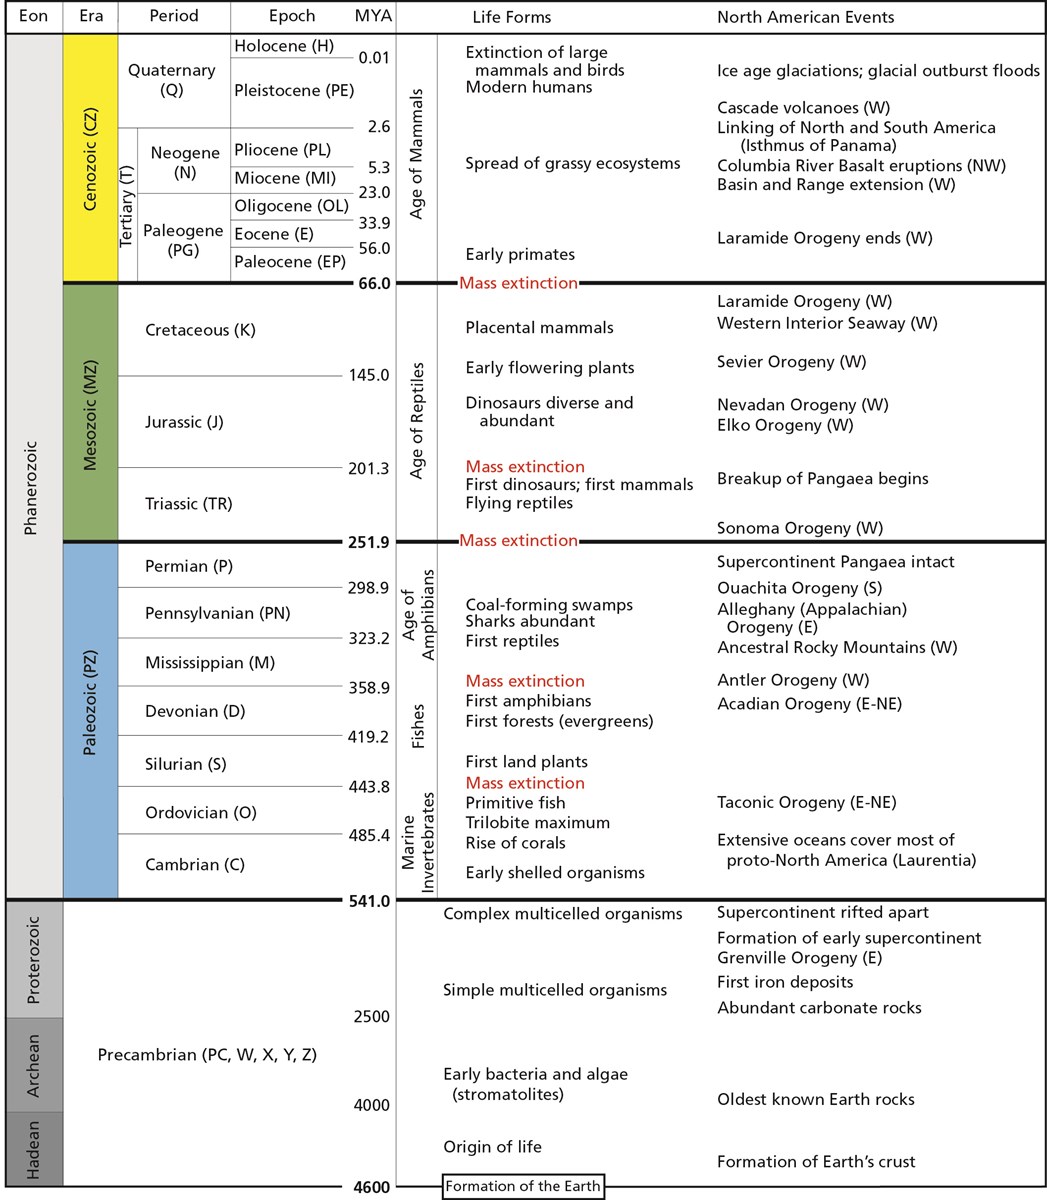 Geologic time scale showing the geologic eons, eras, periods, epochs, and associated dates in millions of years ago (MYA). The time scale also shows the onset of major evolutionary and tectonic events affecting the North American continent.